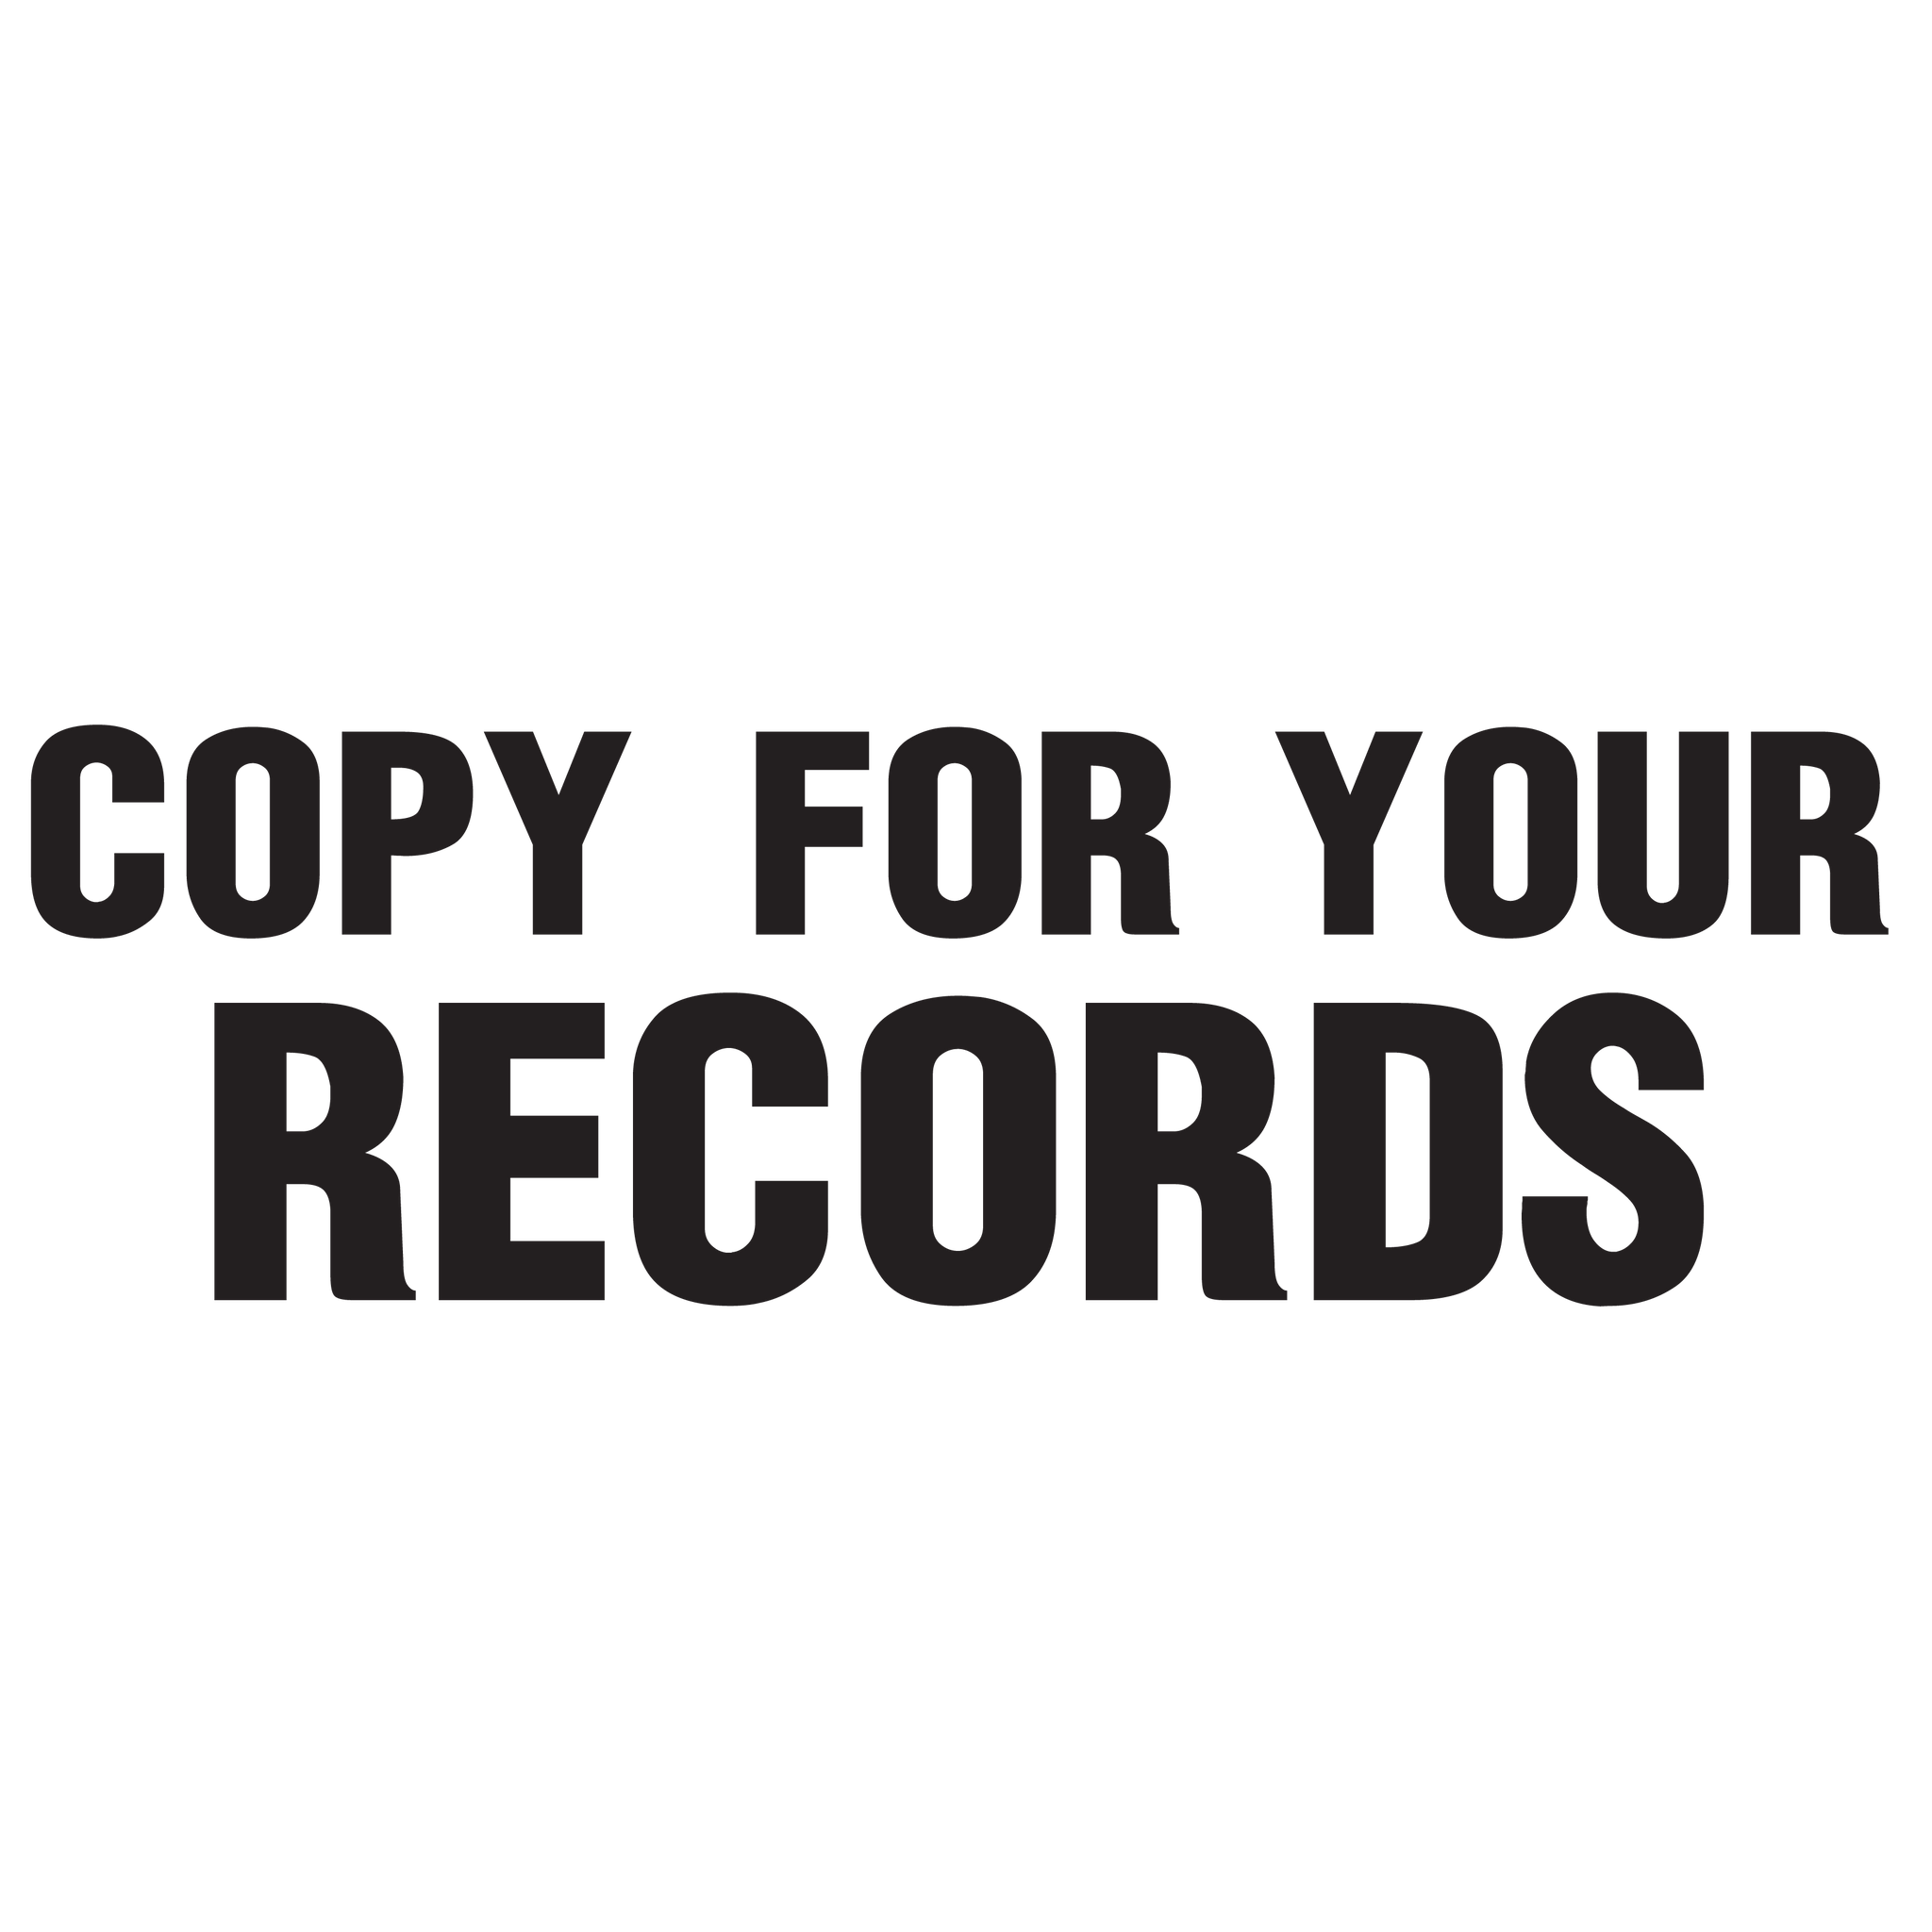 Bold COPY FOR YOUR RECORDS Stamp